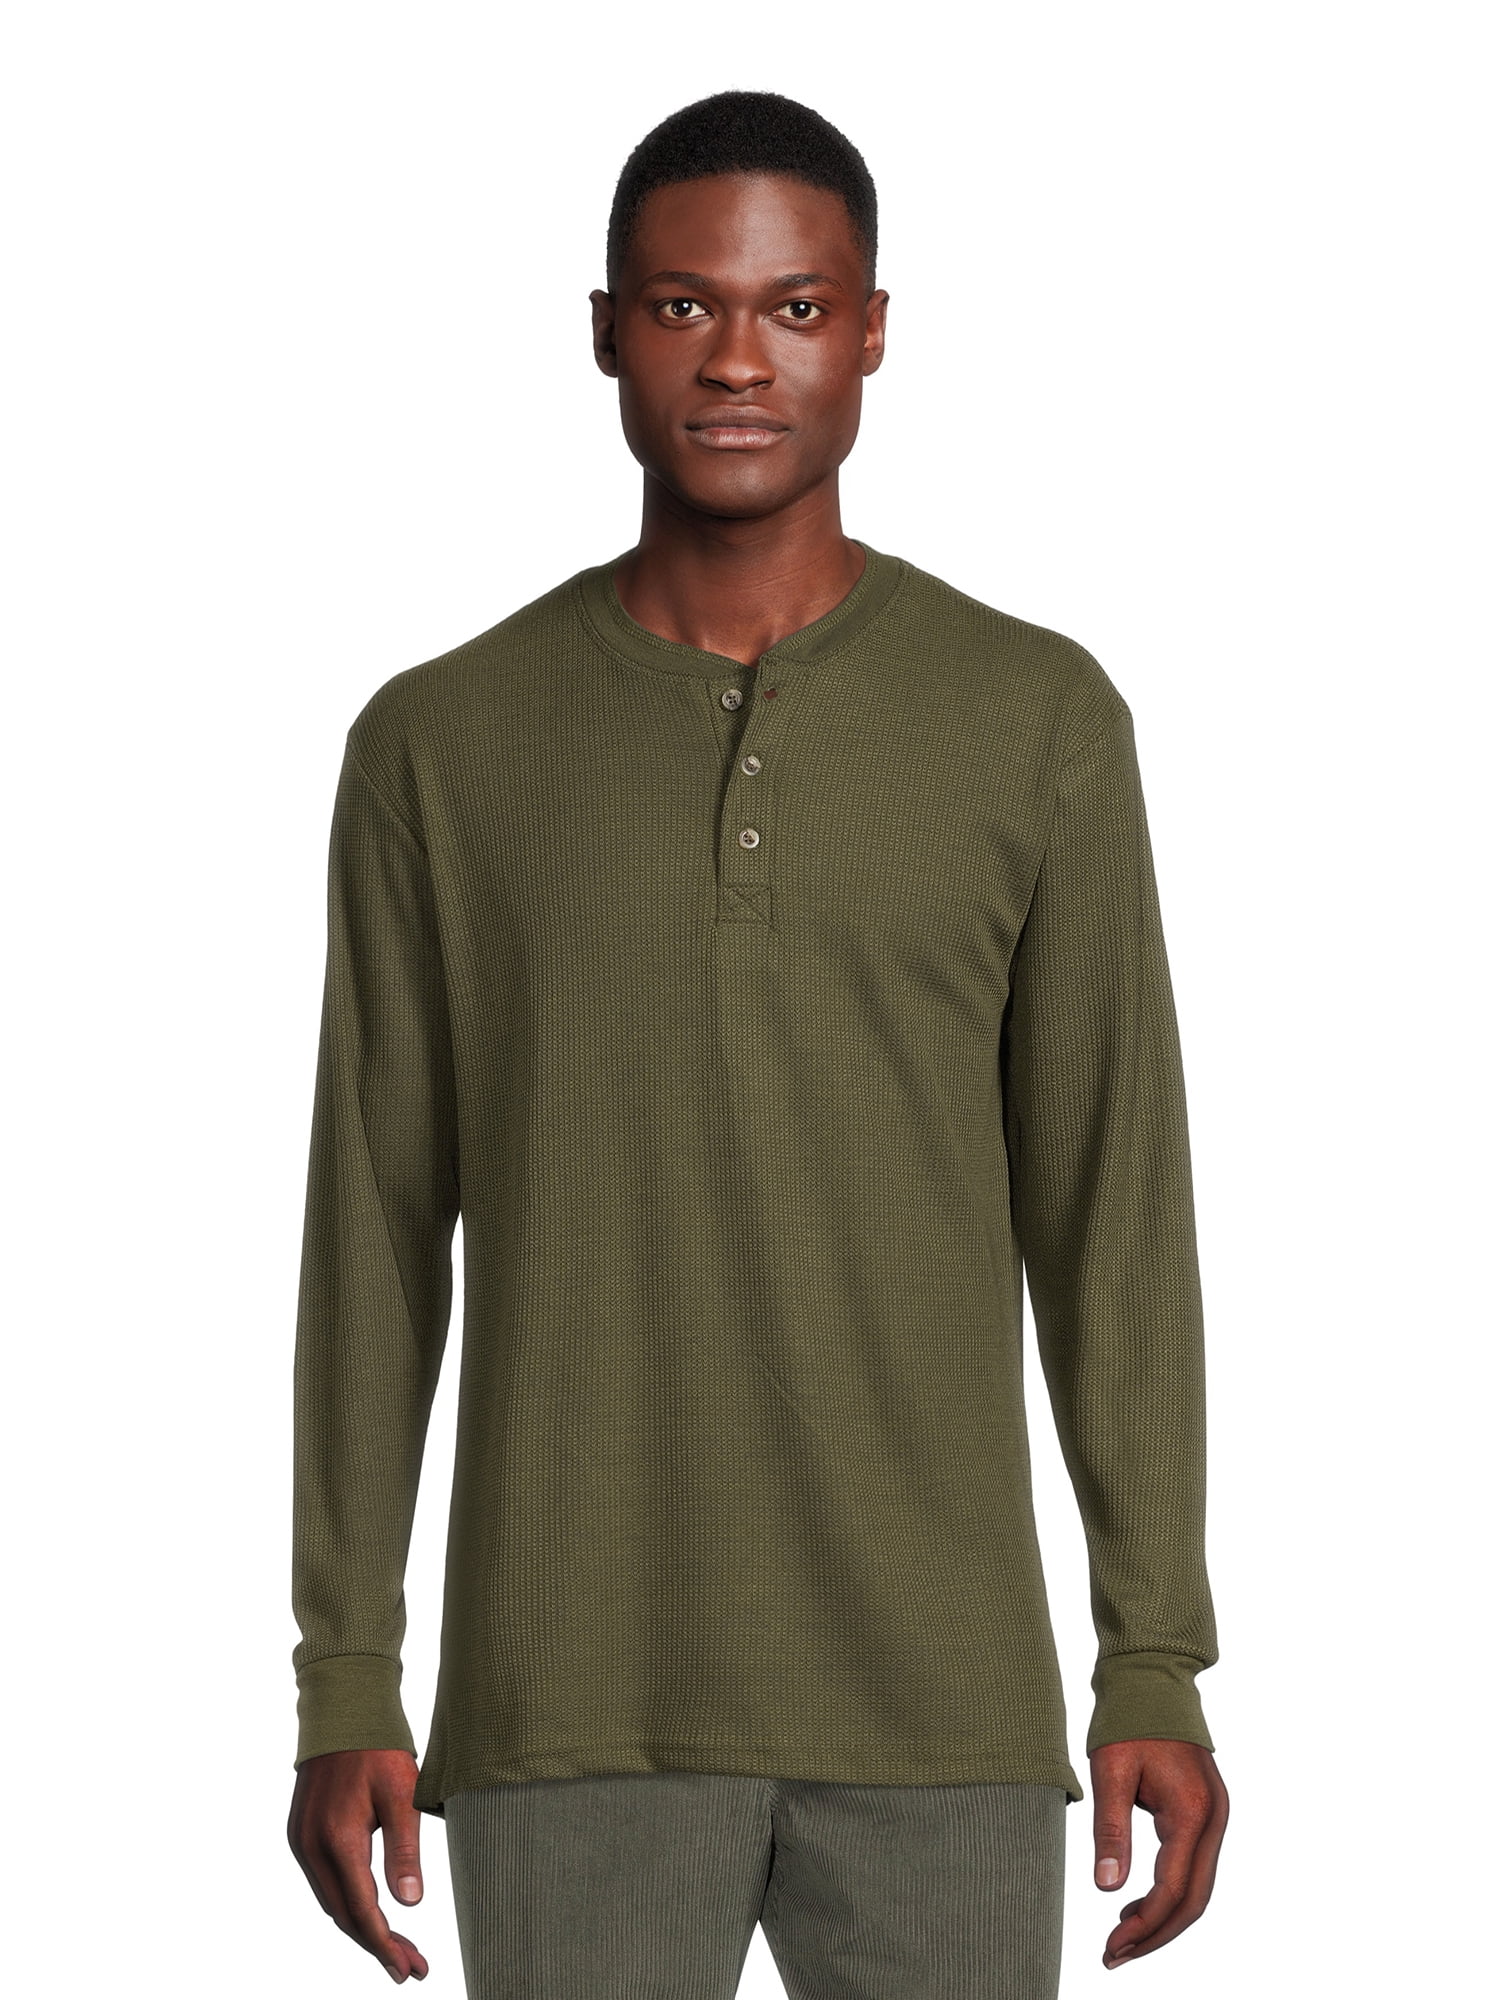 Smith & Eagle Men's Heavyweight Thermal Henley Shirt with Long Sleeves 